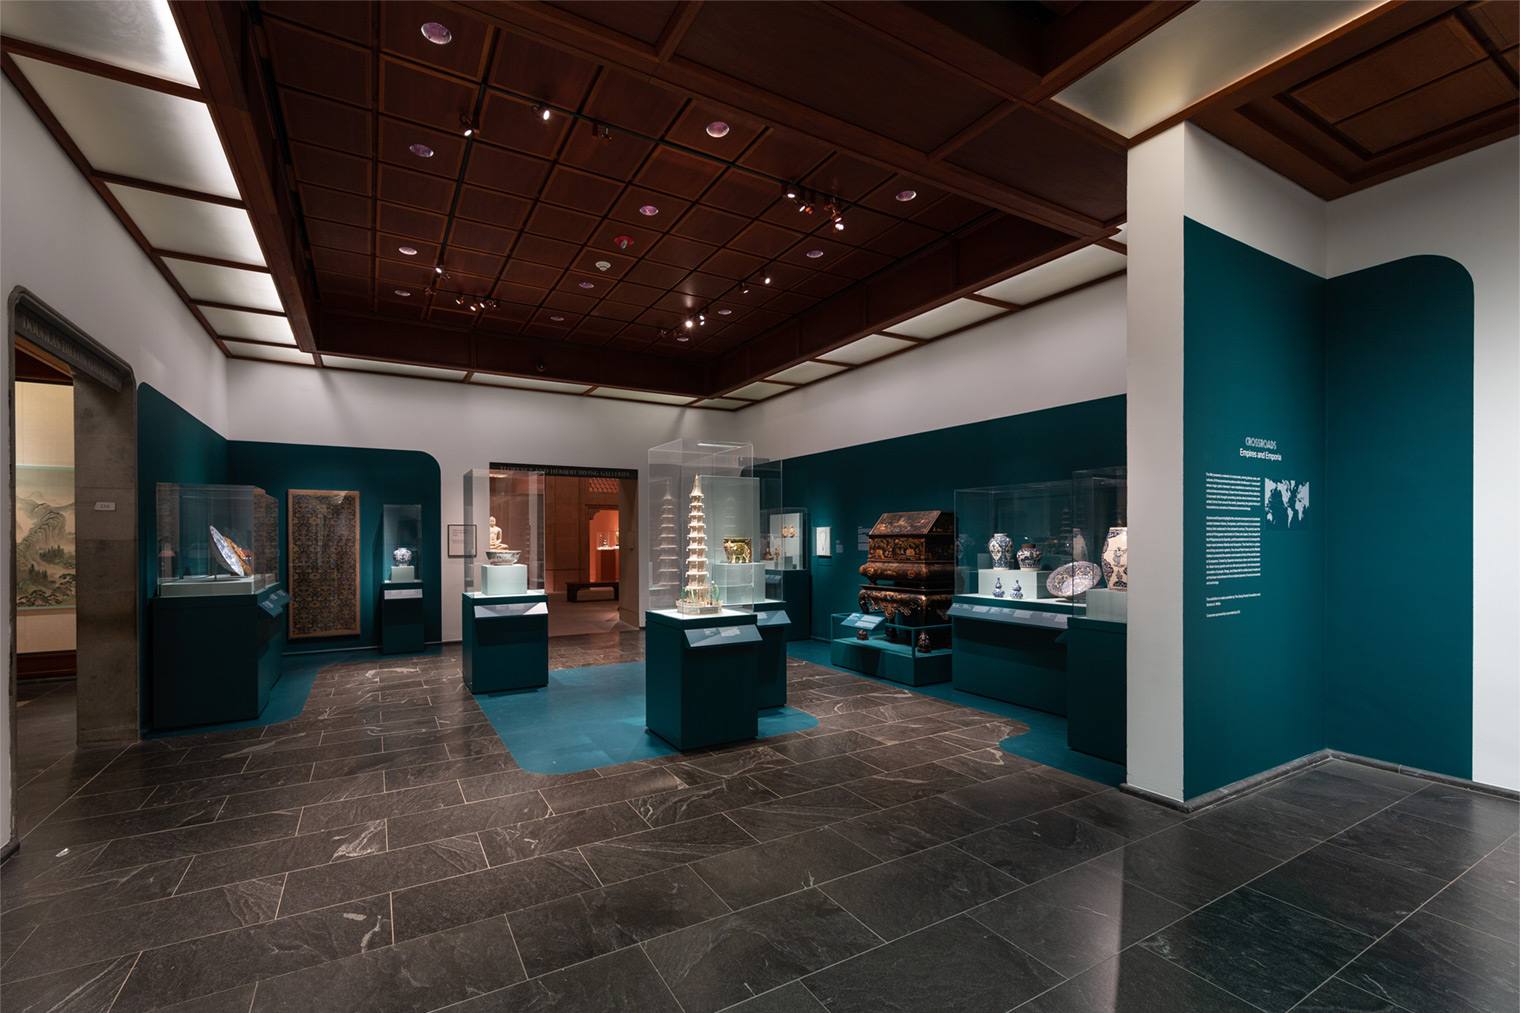 A view of the Asian Art Galleries, with cases displaying objects made for transnational trade